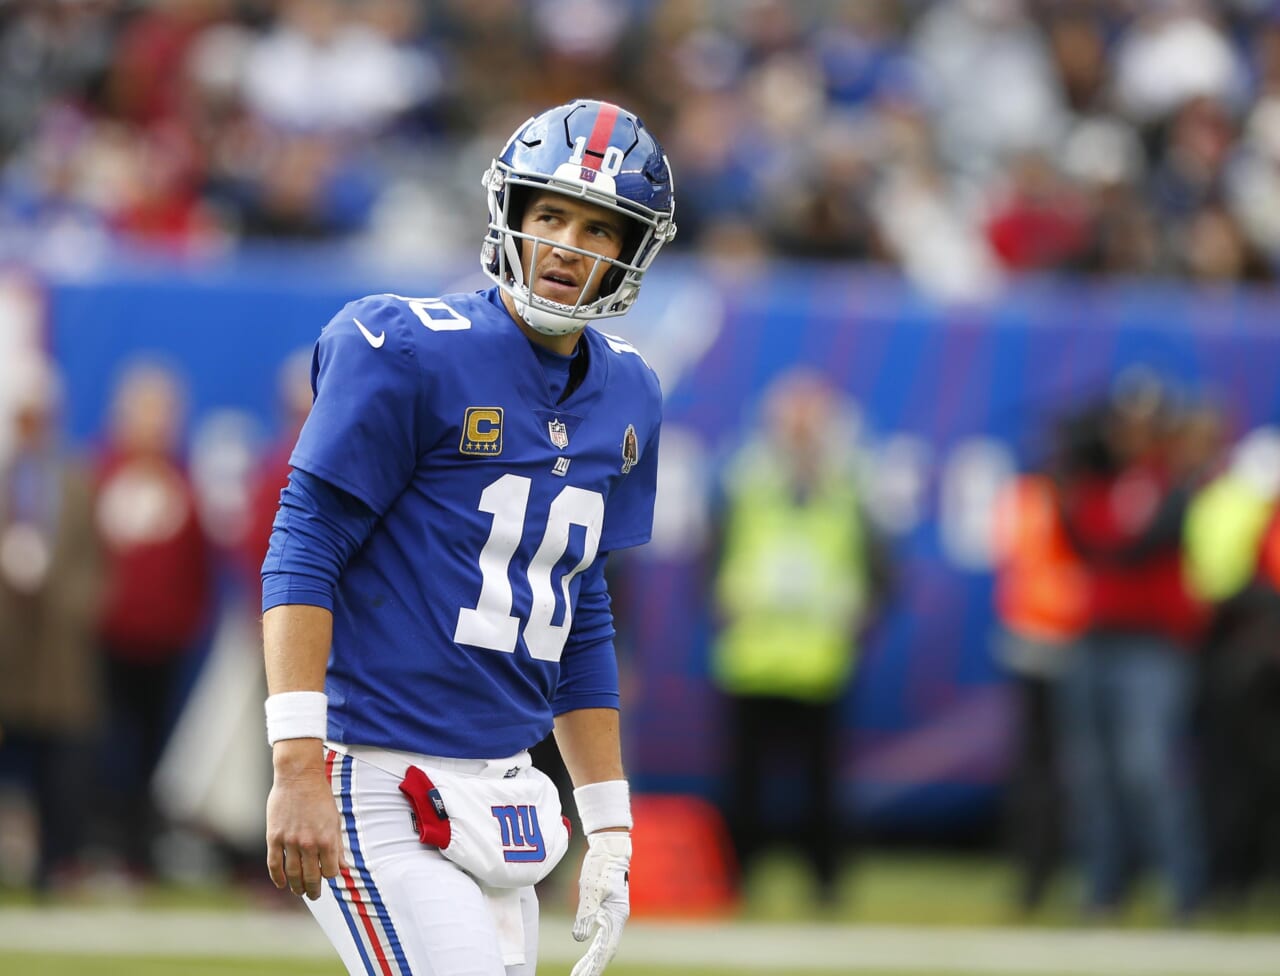 New York Giants: Eli Manning Needs To Take More Risks